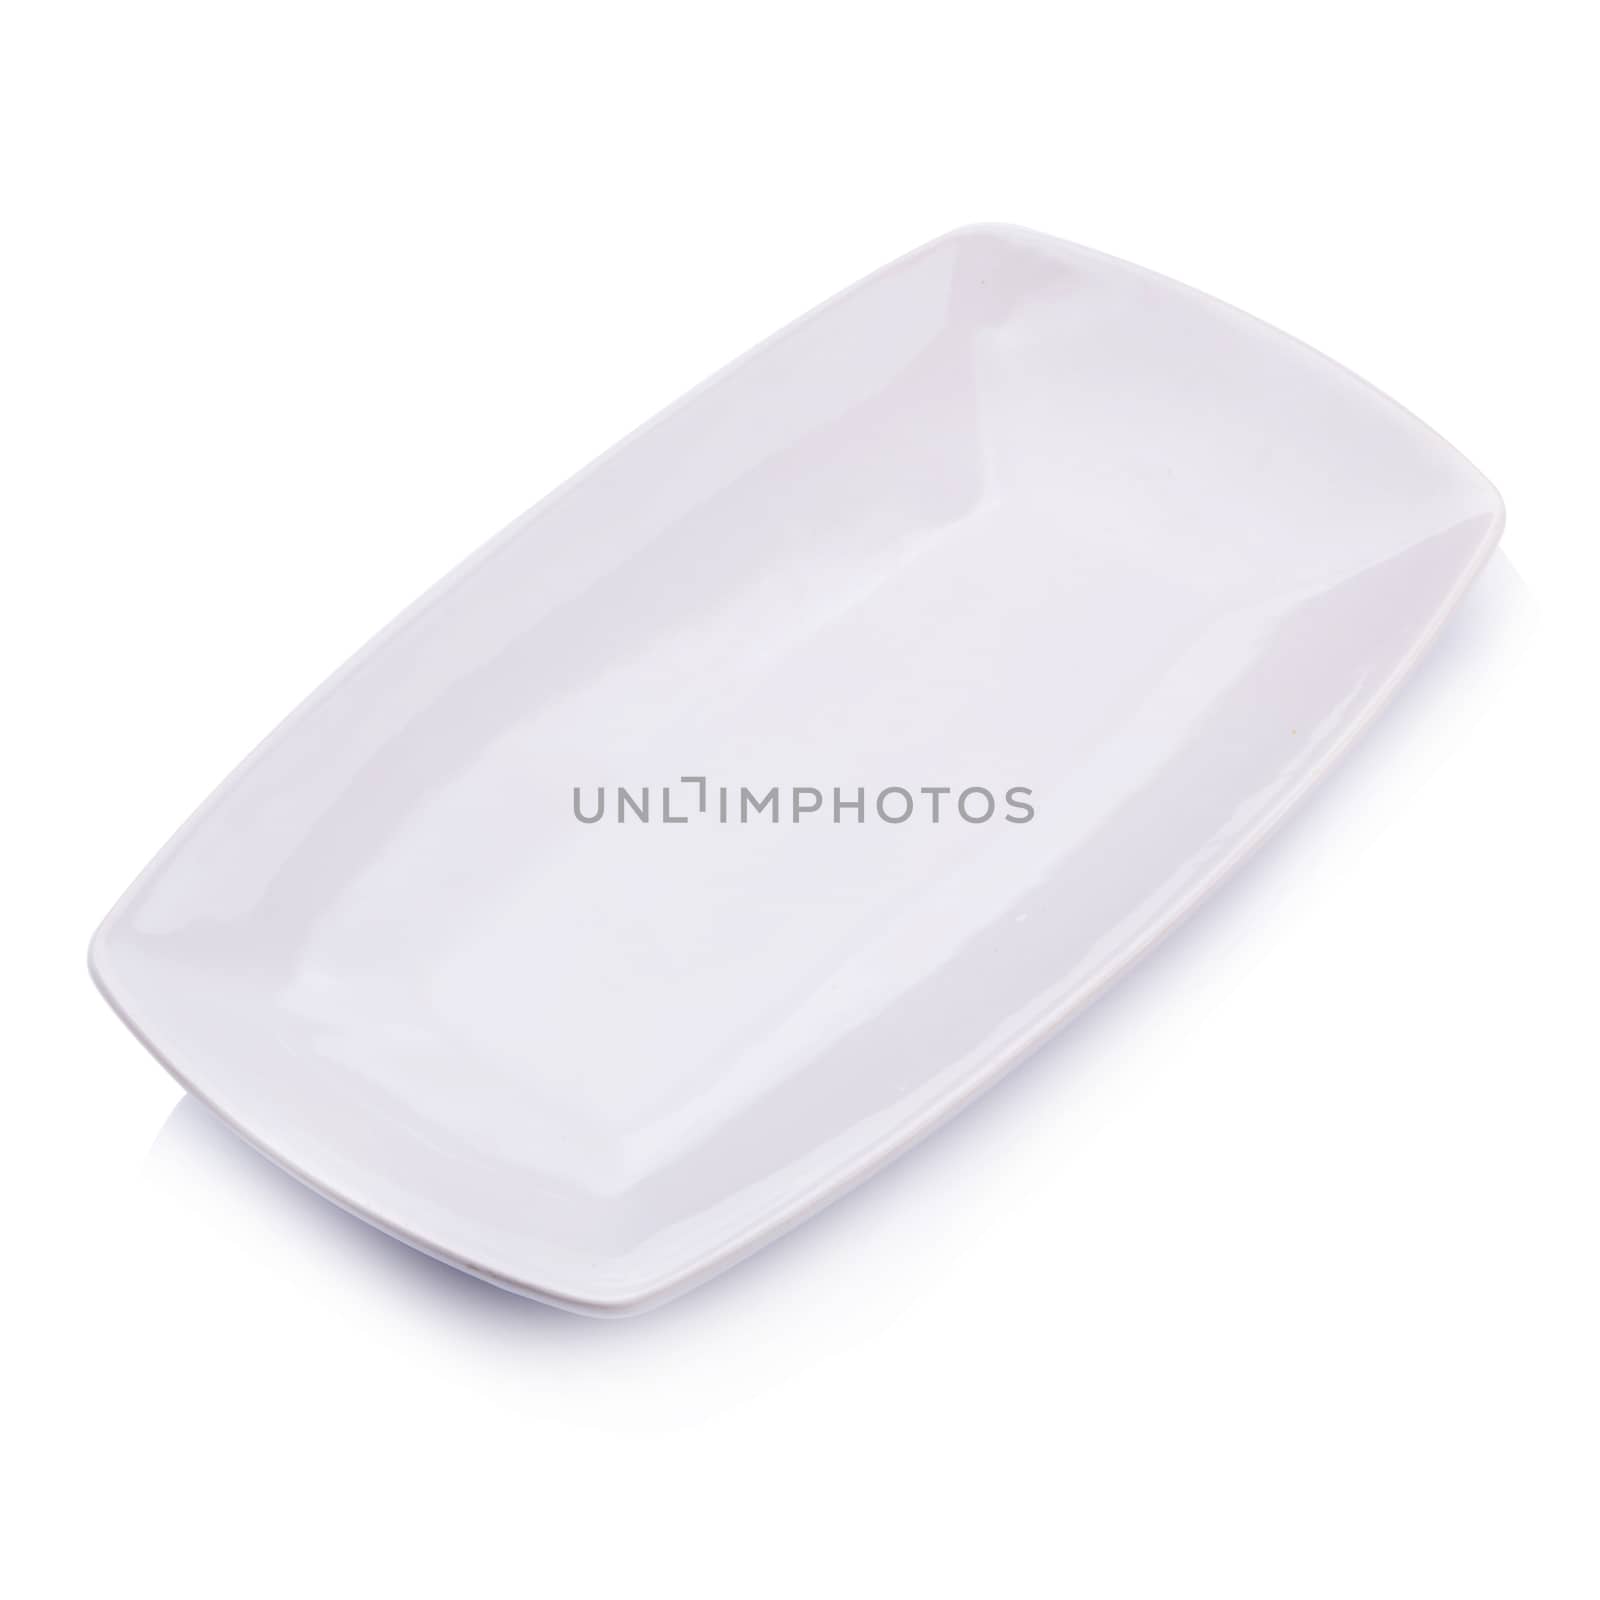 Ceramic white plate on a white background.